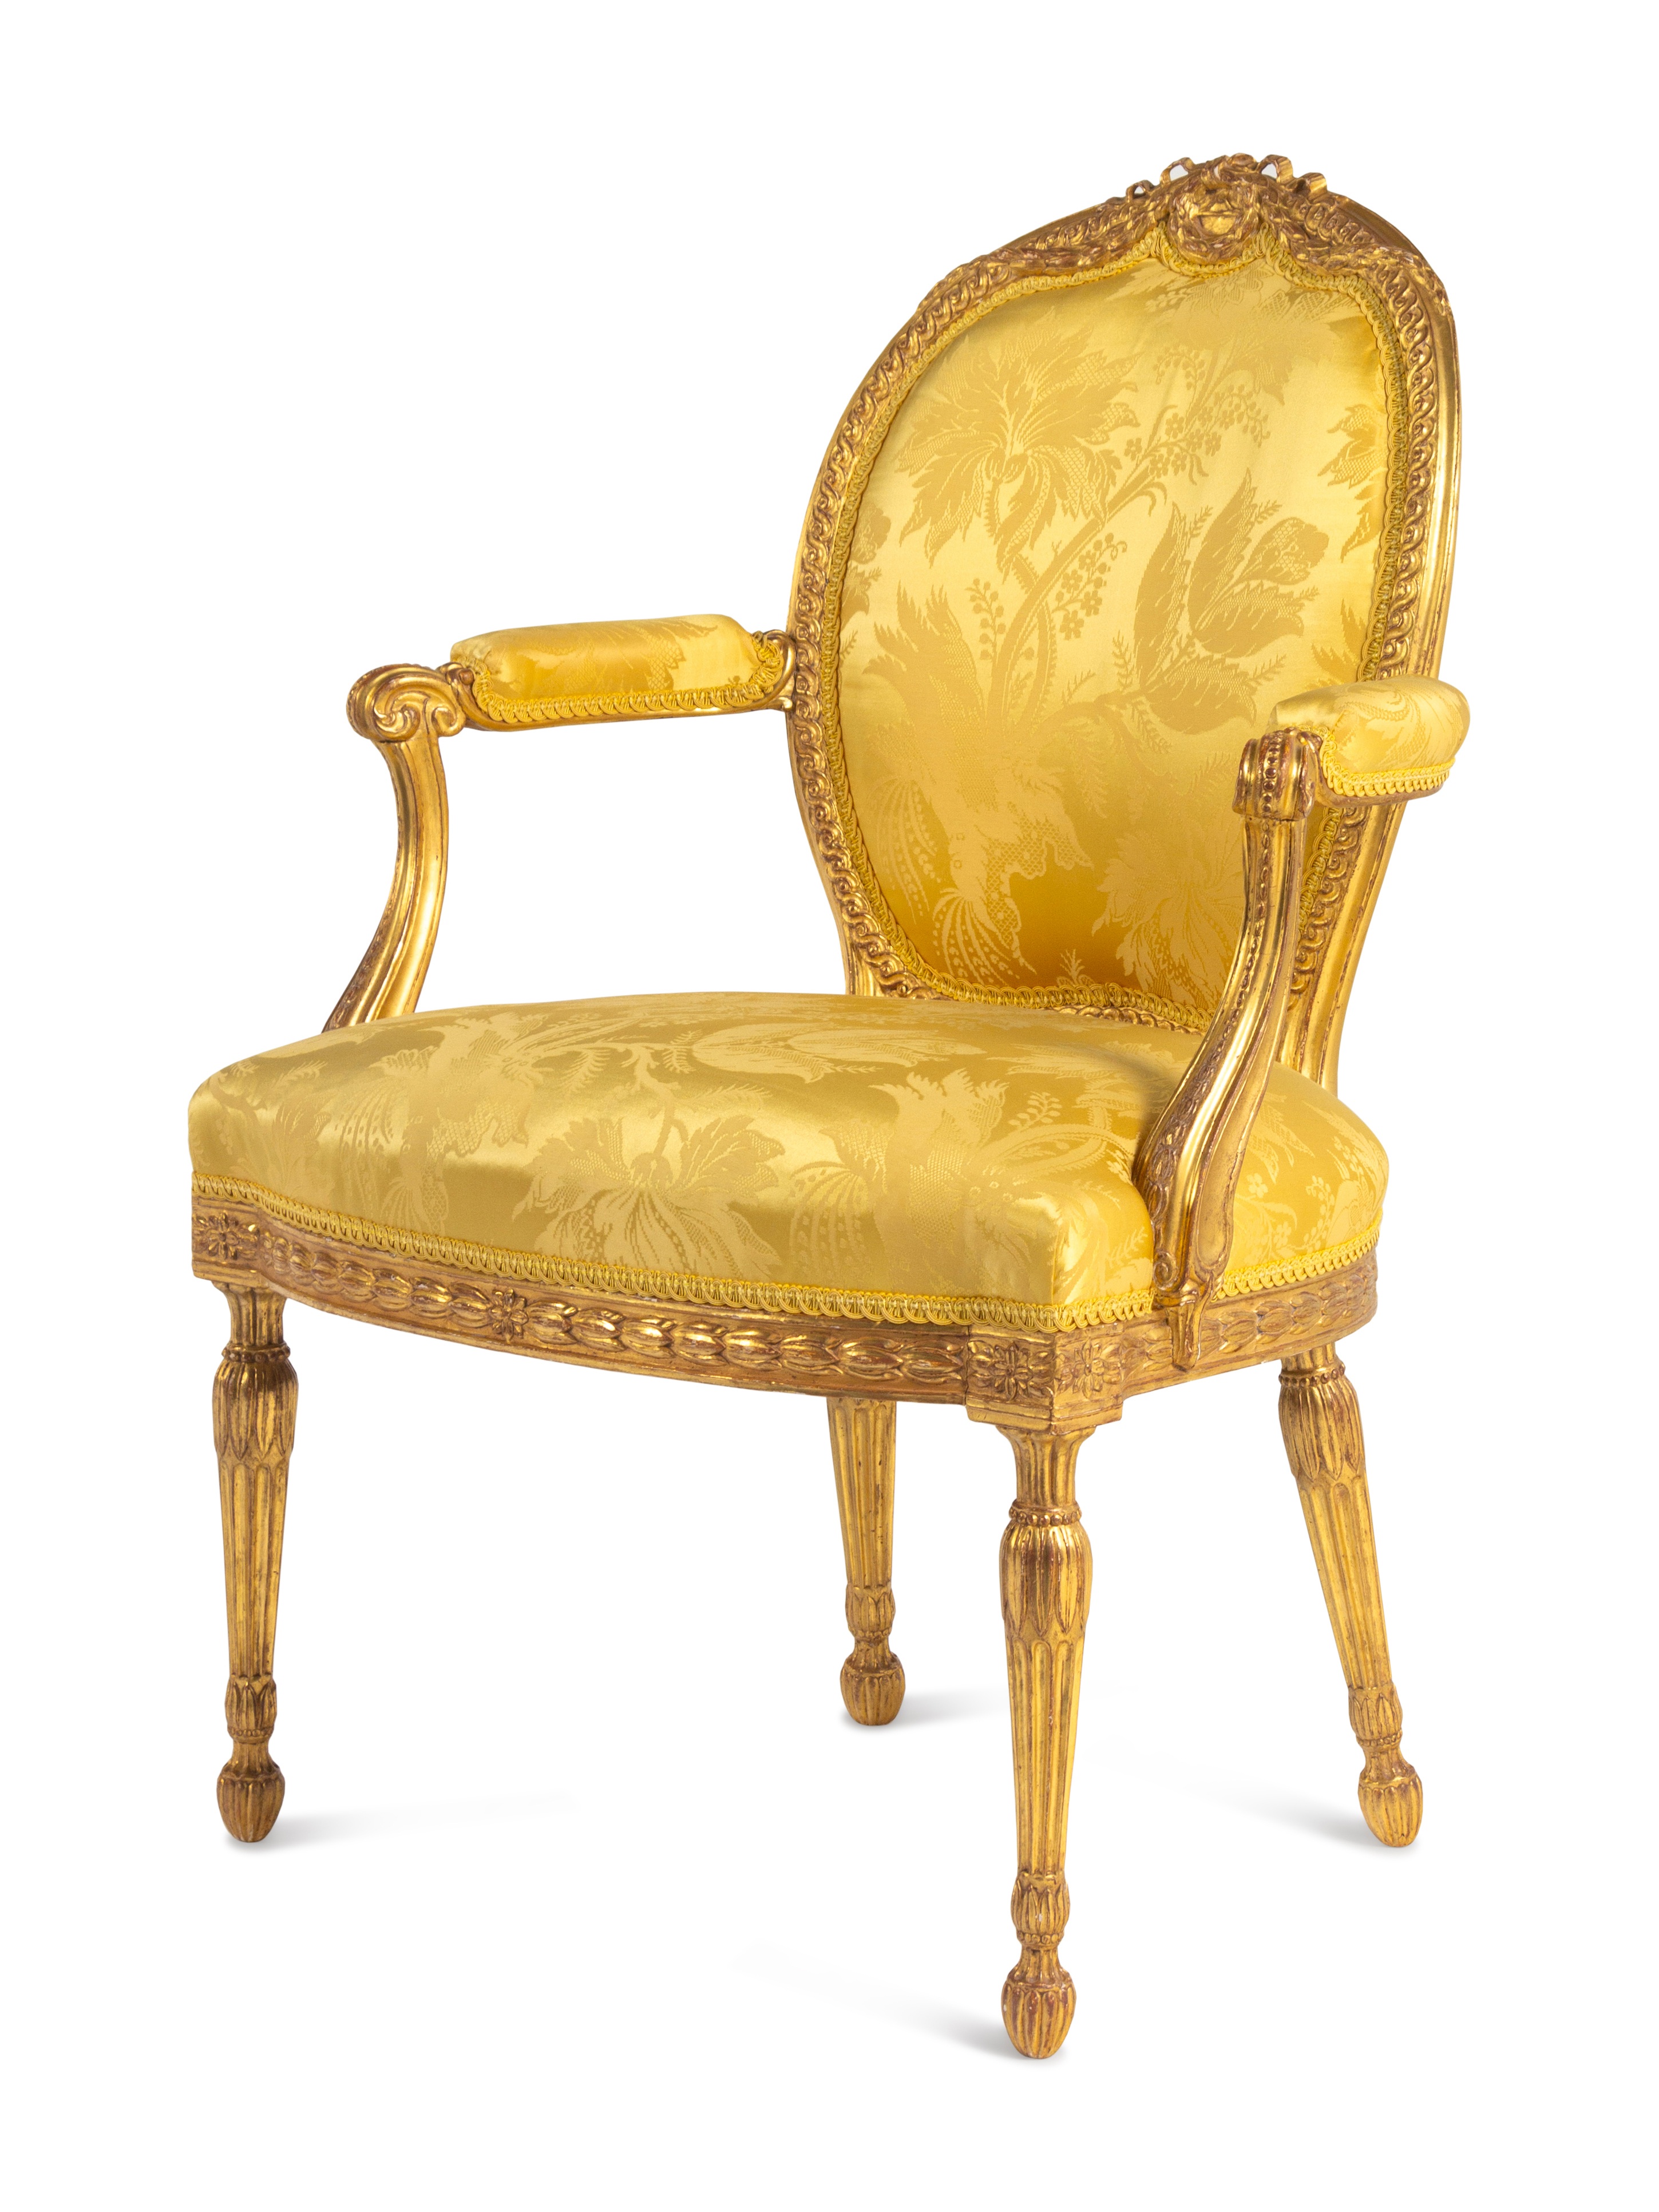 A Pair of George III Carved Giltwood Armchairs - Image 3 of 14